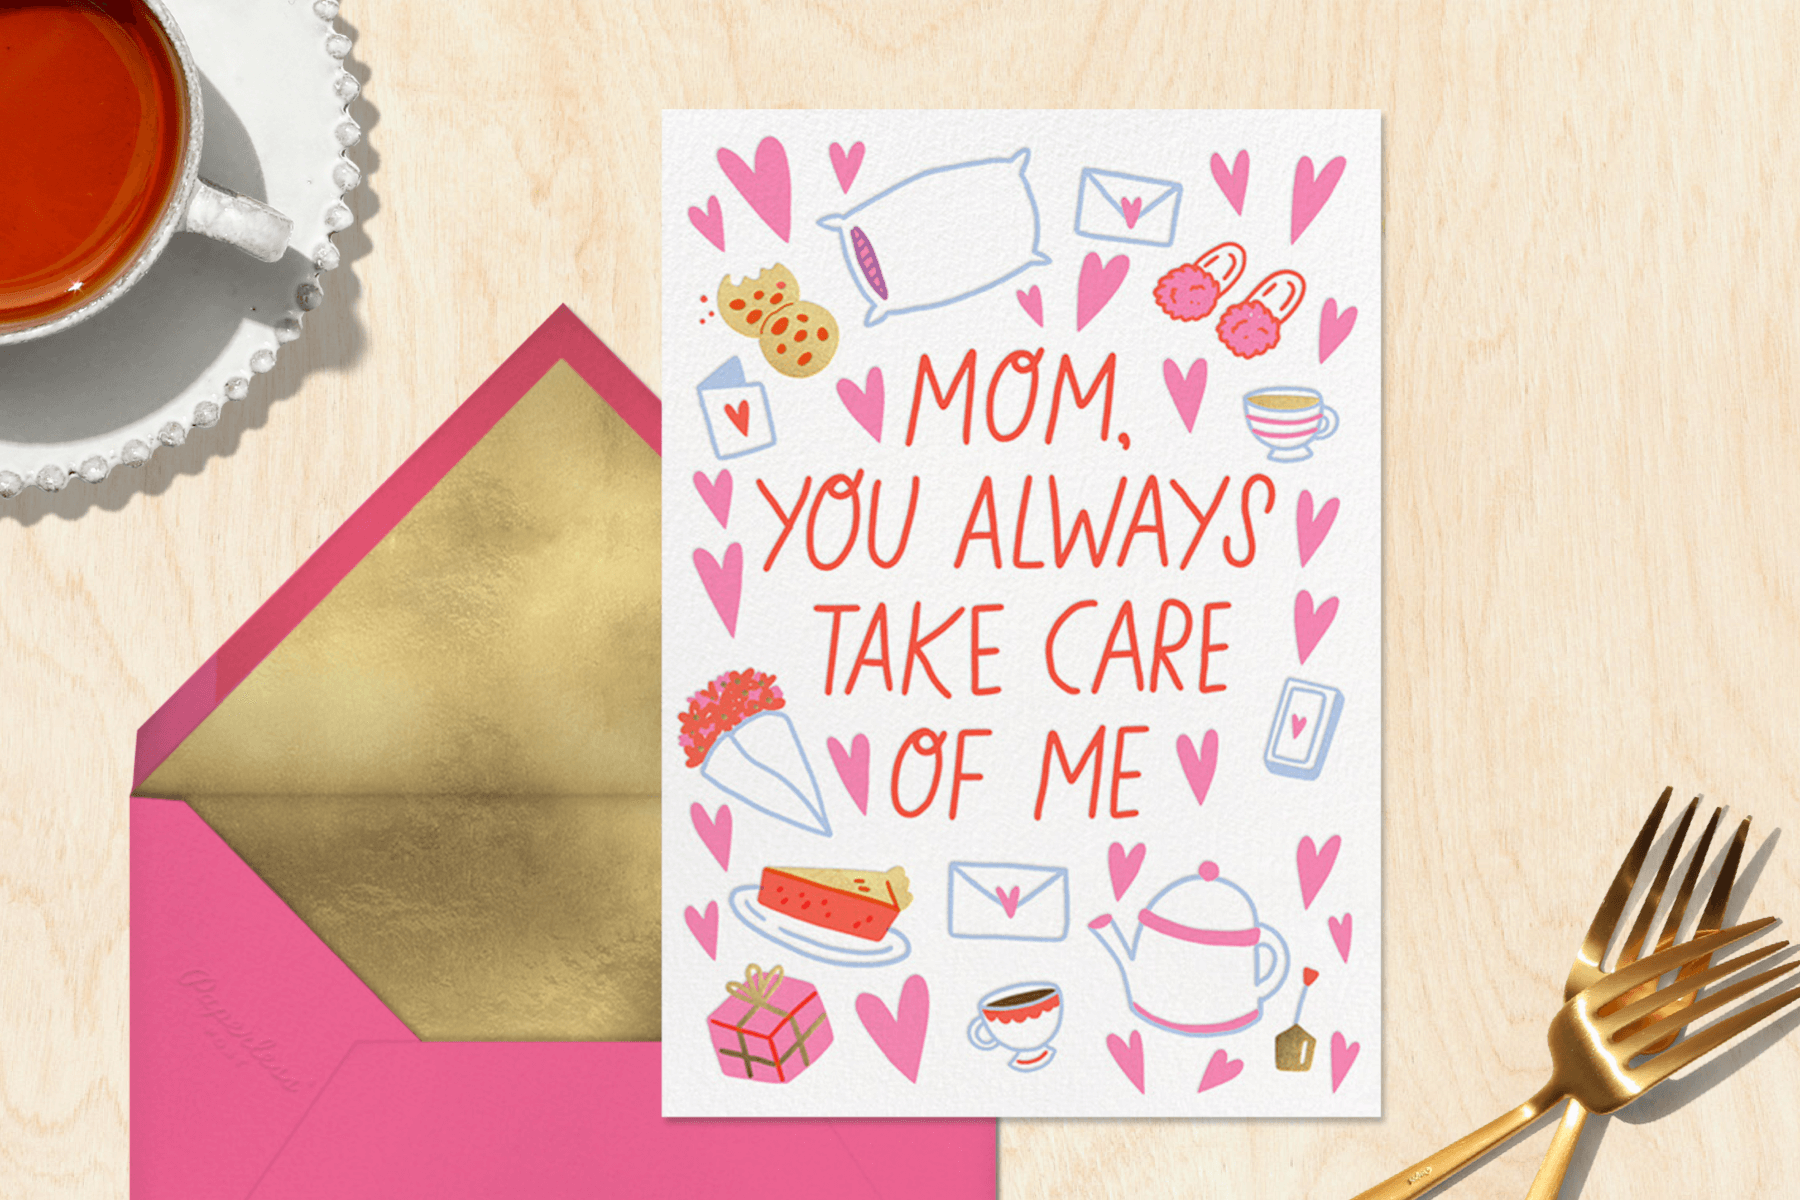 A Valentine’s Day card for your mom with cute illustrations of hearts and objects.